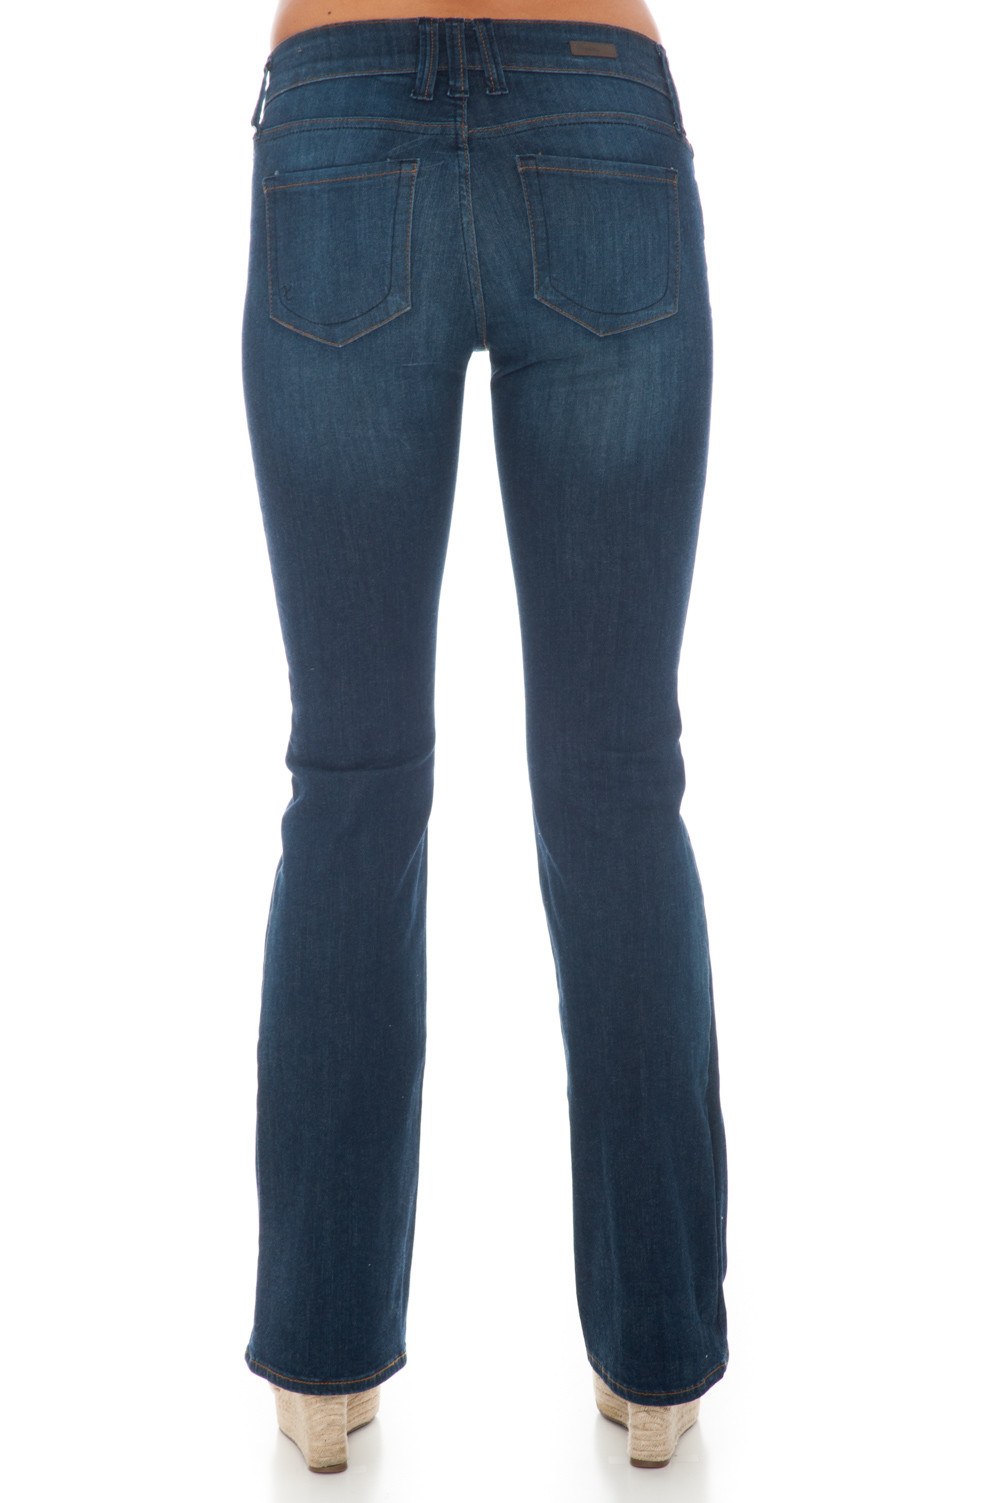 Jean - Adaptive Natalie Bootcut by Kut from the Kloth – Twisted Couture